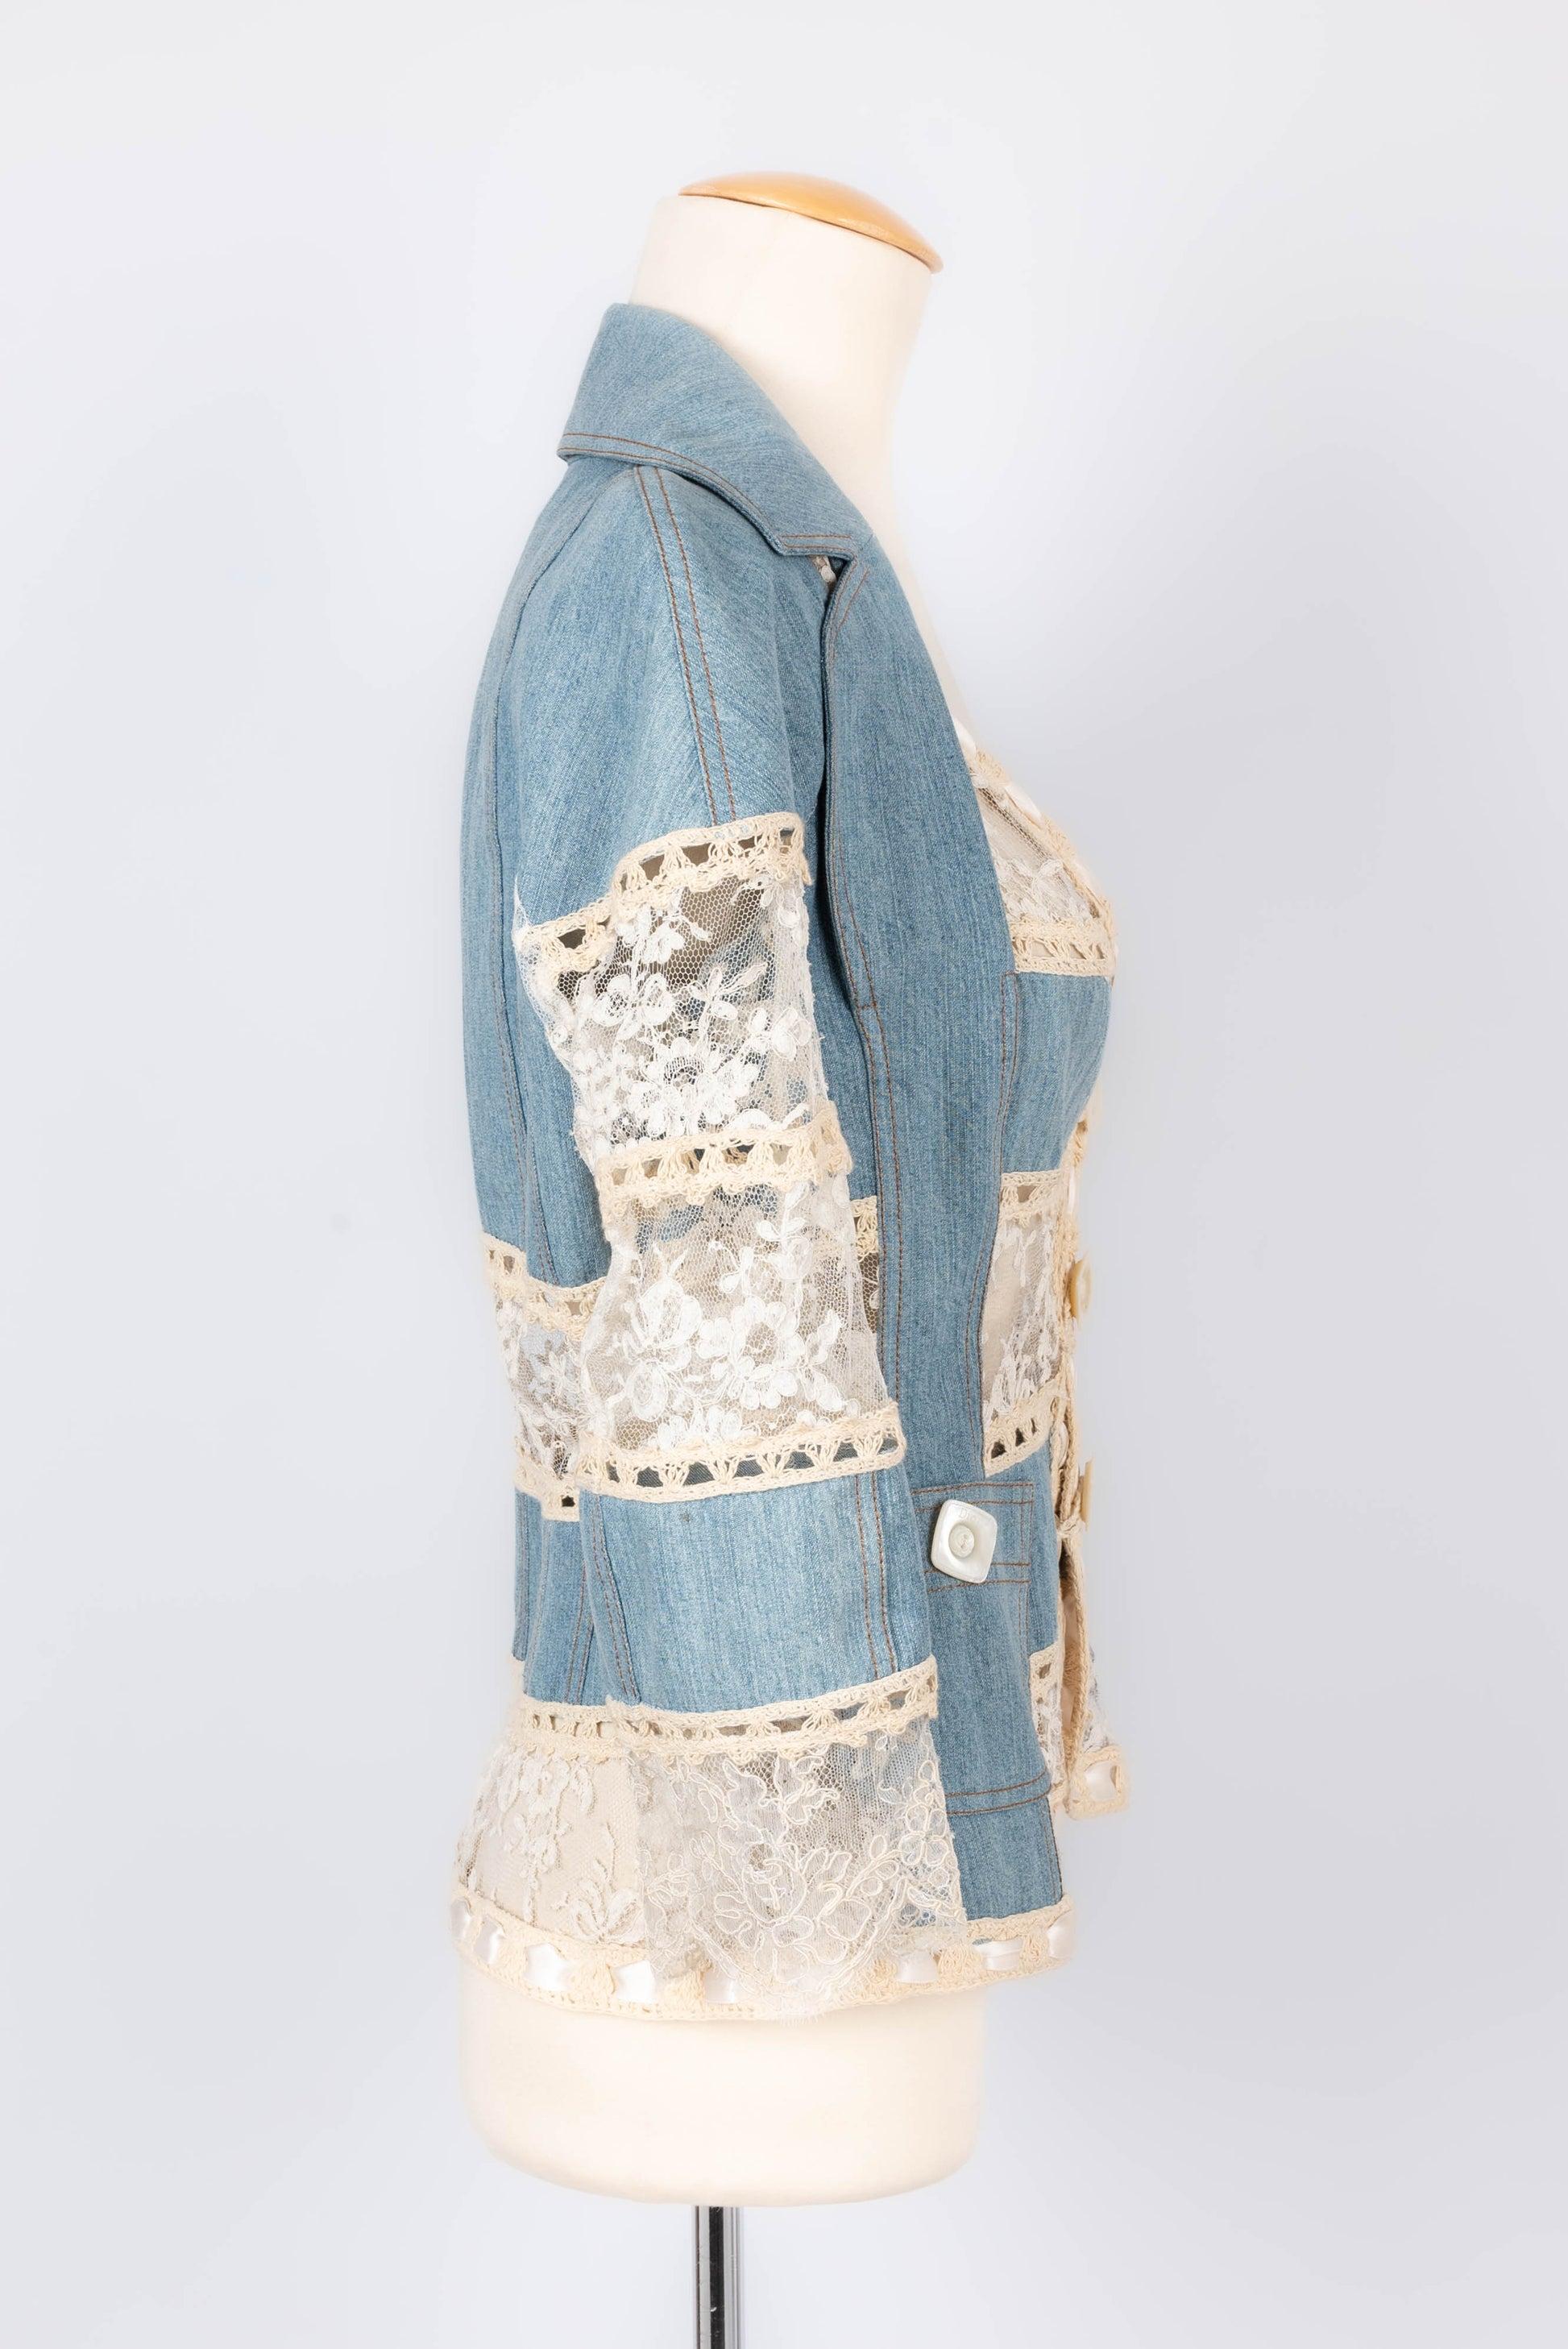 Women's Dior Jacket in Blue Denim and Lace, 2005 For Sale